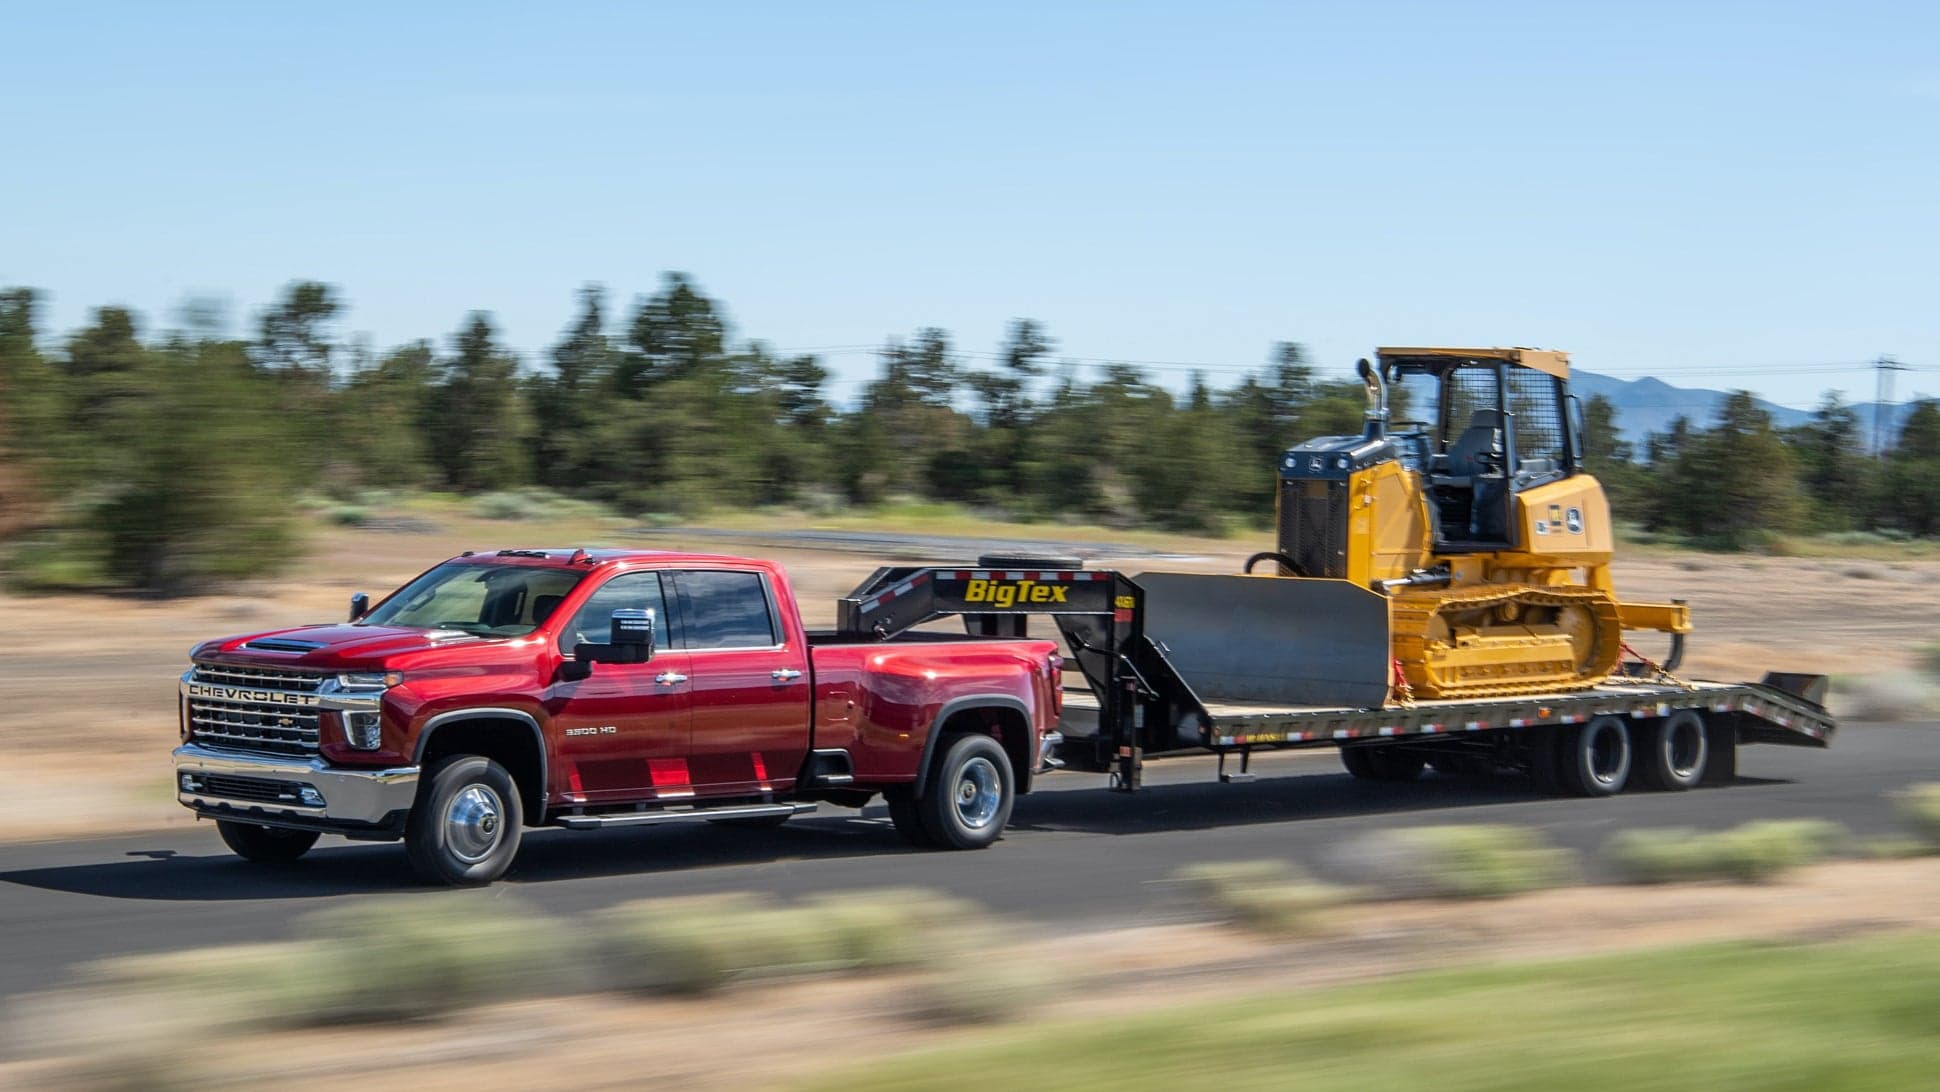 2021 Chevy Silverado 3500 HD Posts Huge Max Towing Capacity of 36,000 Pounds